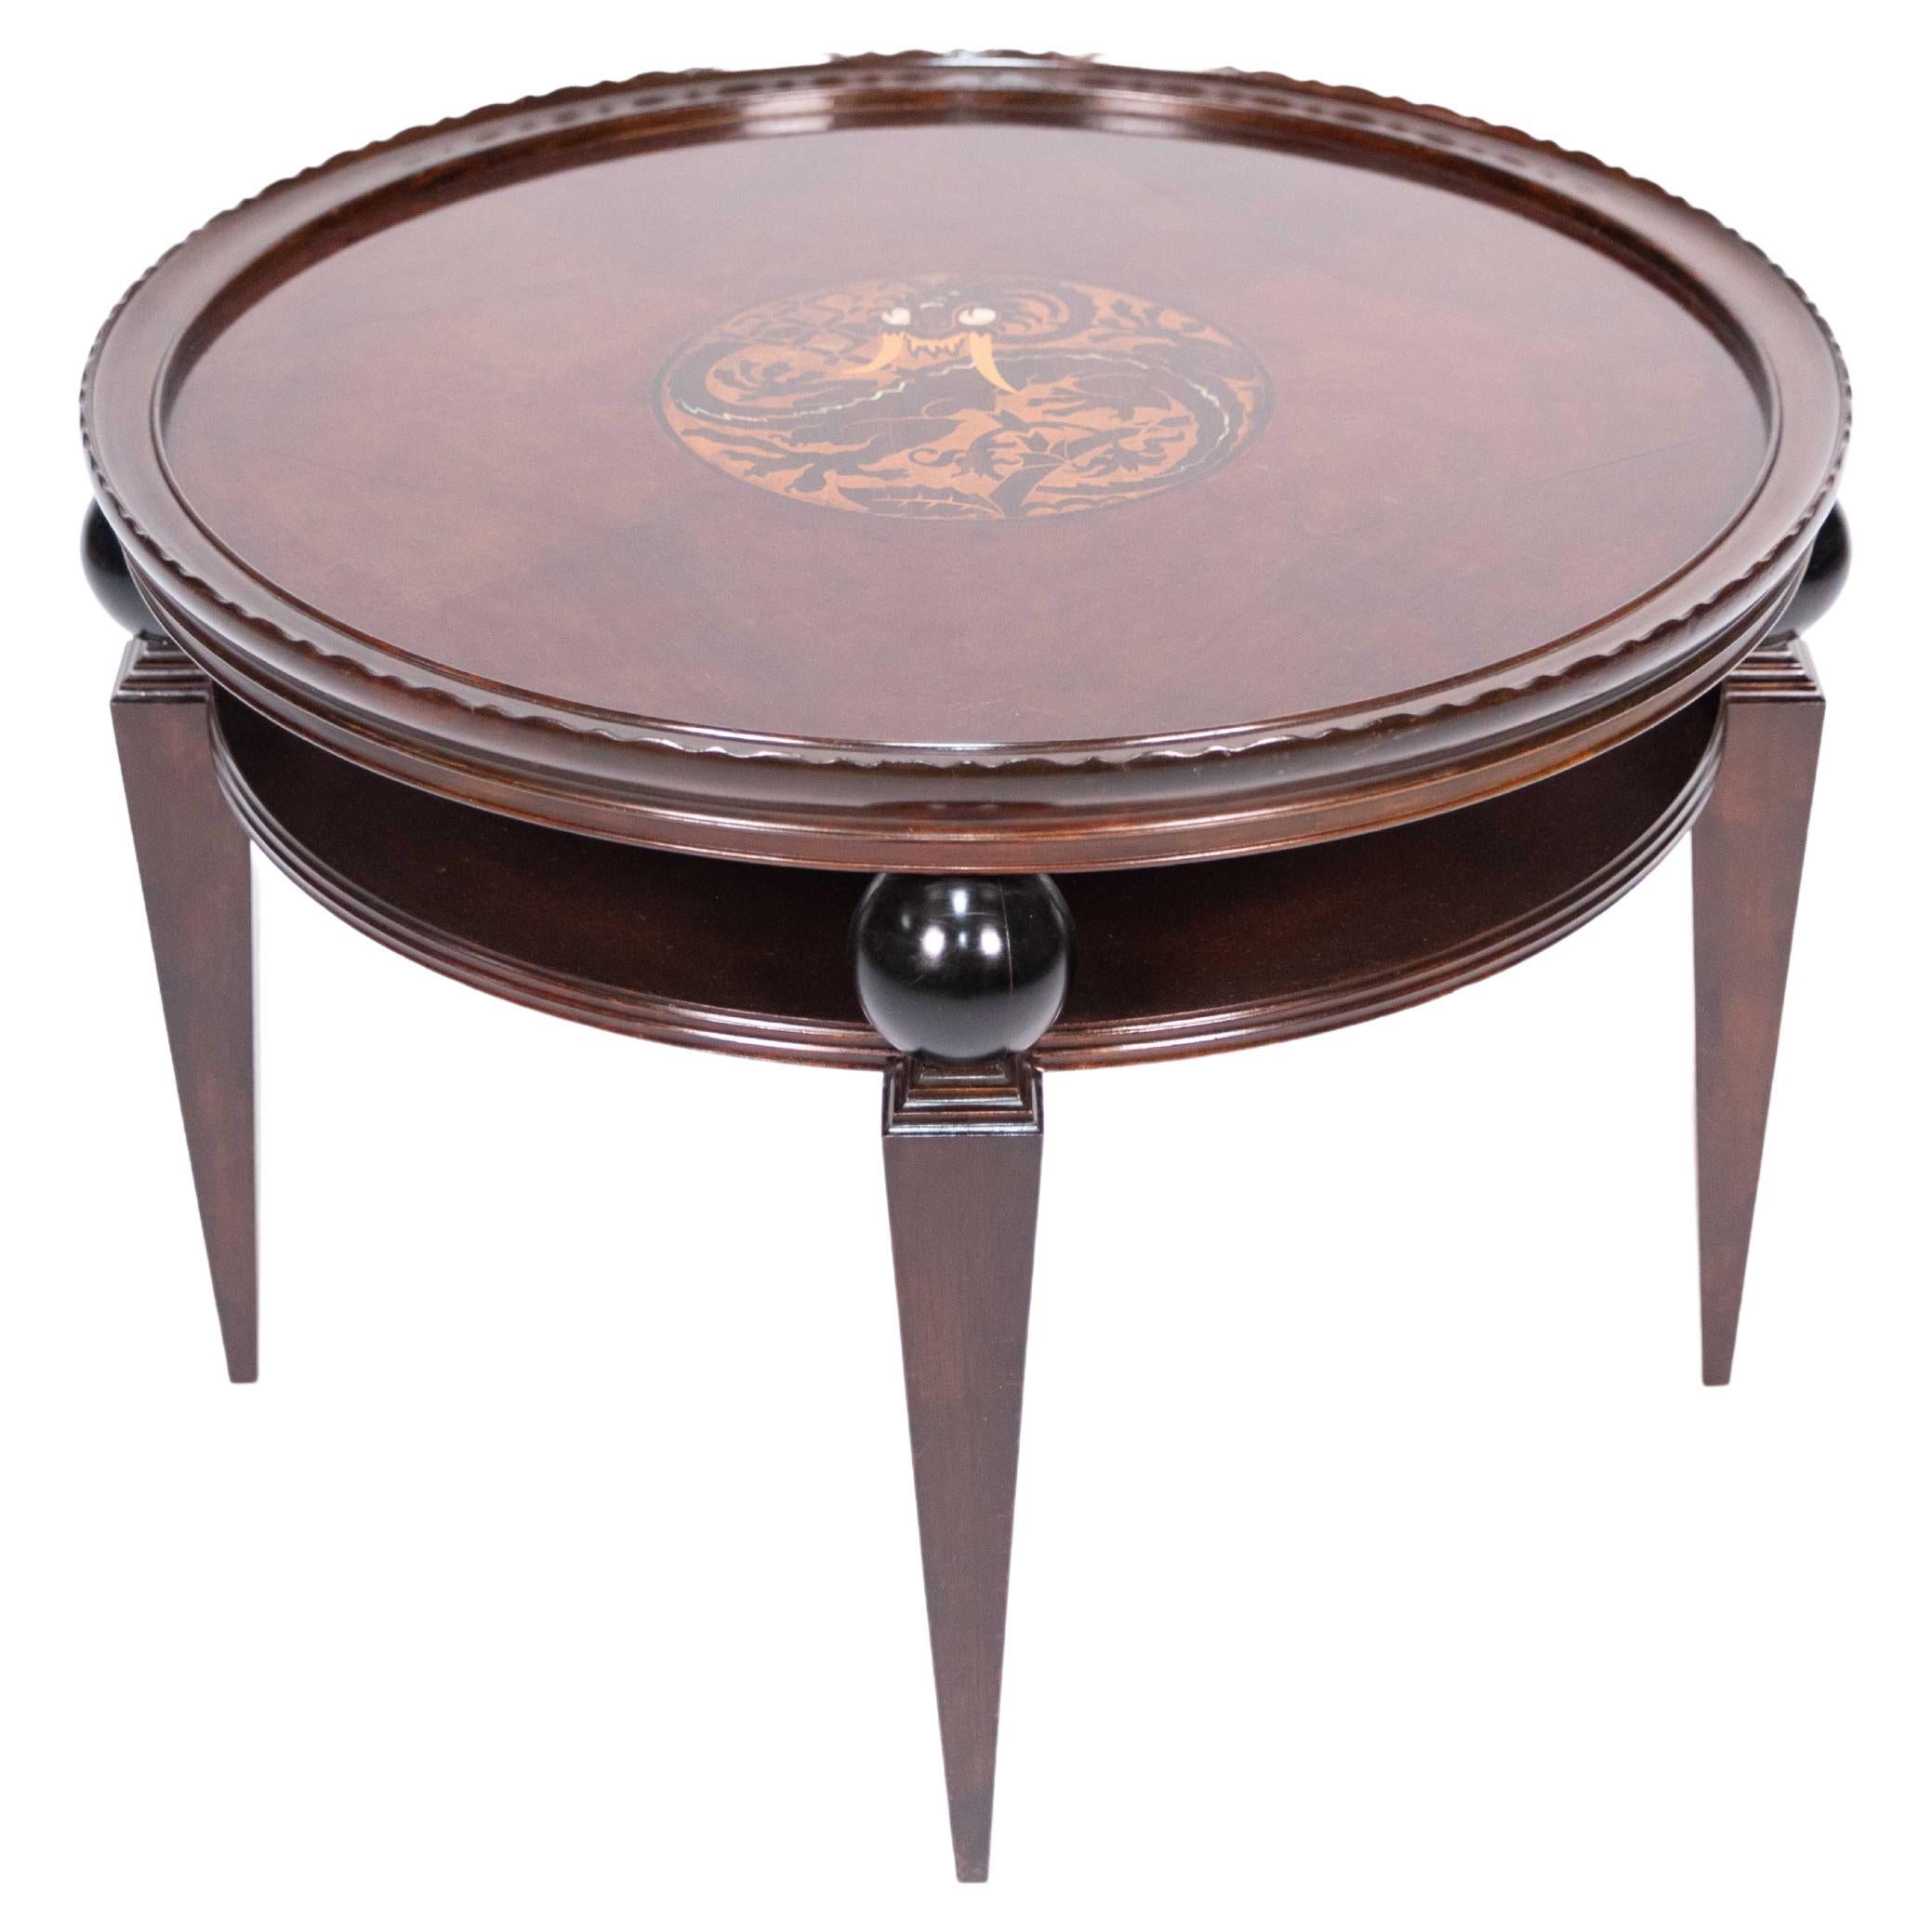 Expressive Coffee Table, Attributed to Dr. Oskar Wlach, 1923 For Sale